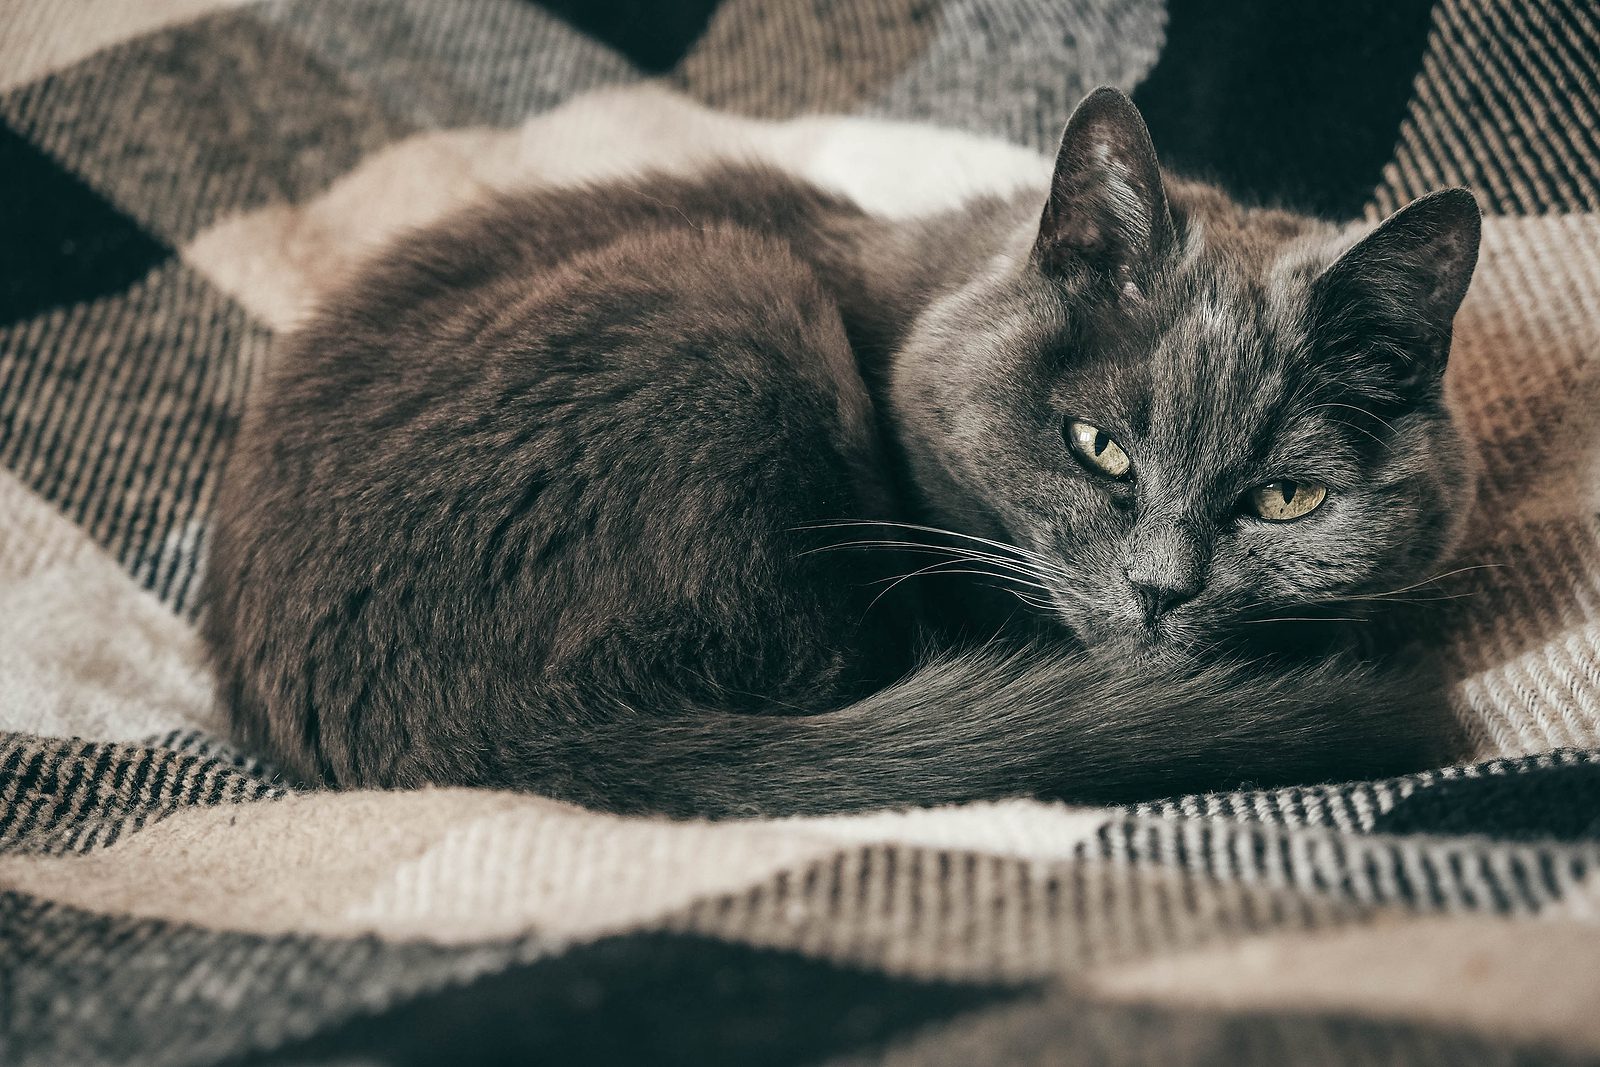 Sick or sad grey cat curled up on couch looking at camera